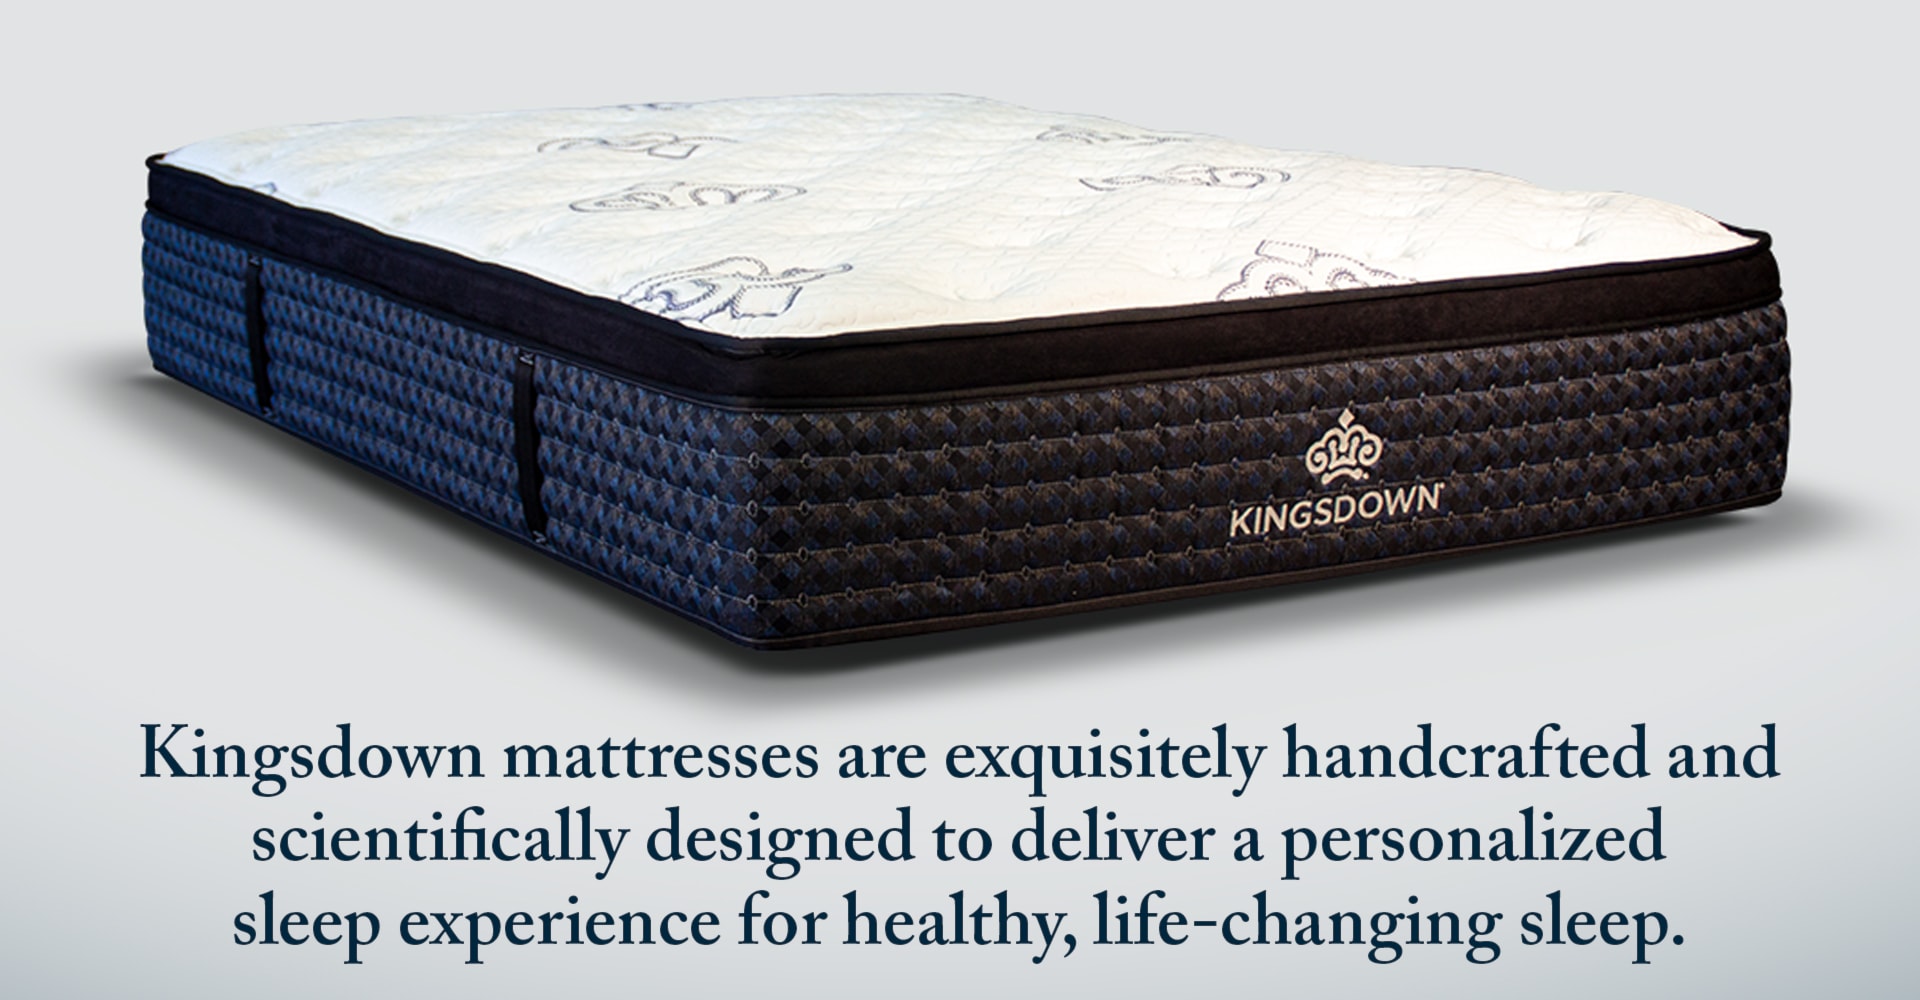 Kingsdown | Innovatively designed for exceptional sleep. Classically styled and exquisitely handcrafted using the finest natural materials and generations of craftmanship mastery.